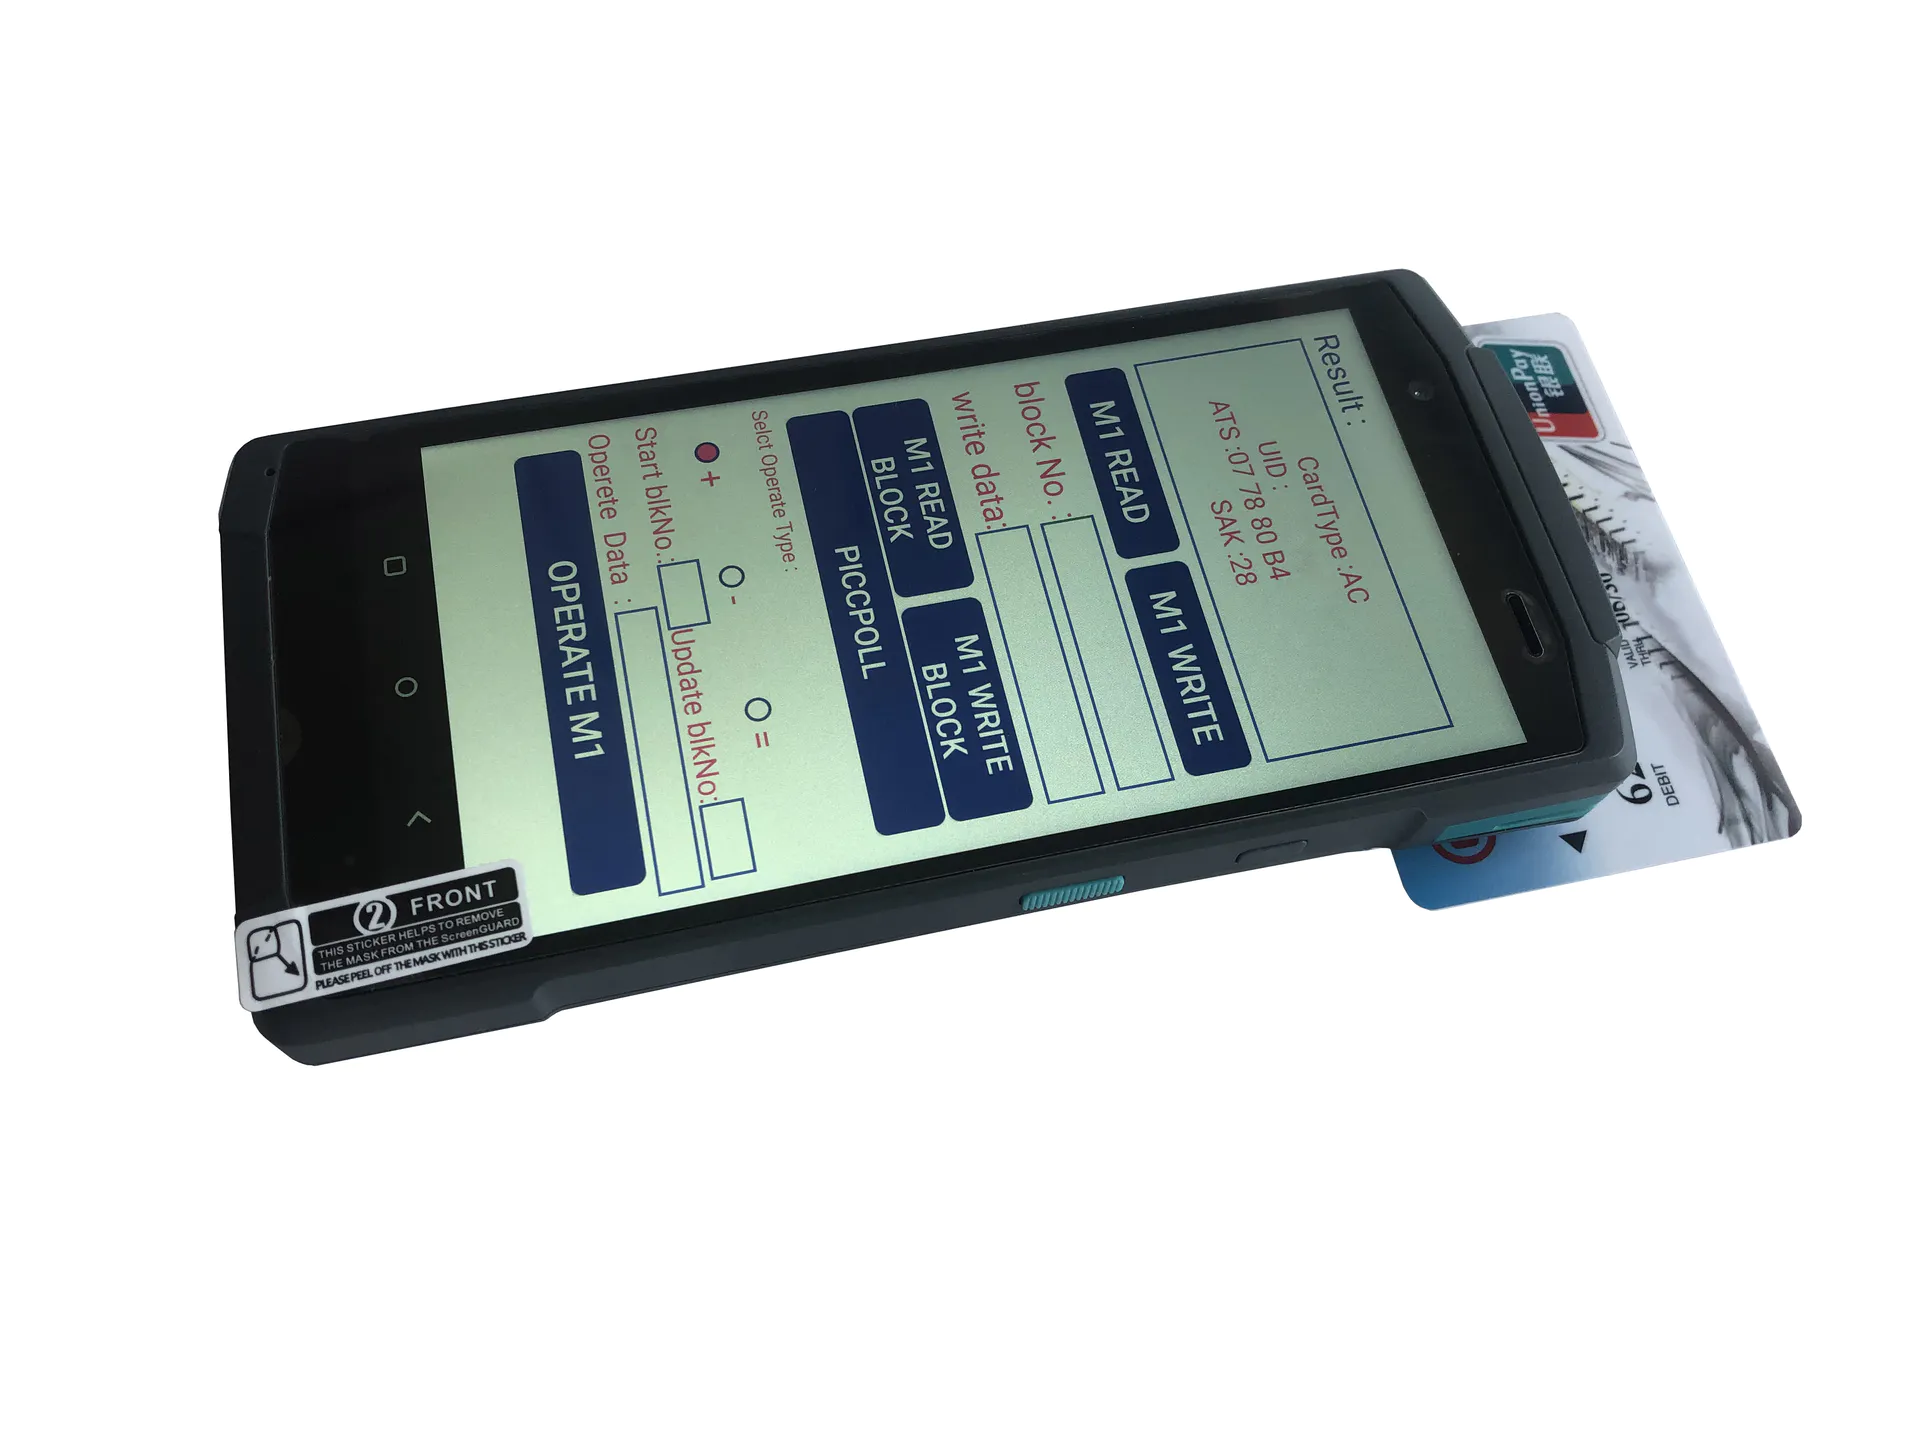 NFC Android Payment System Handheld POS Terminal With Card Reader